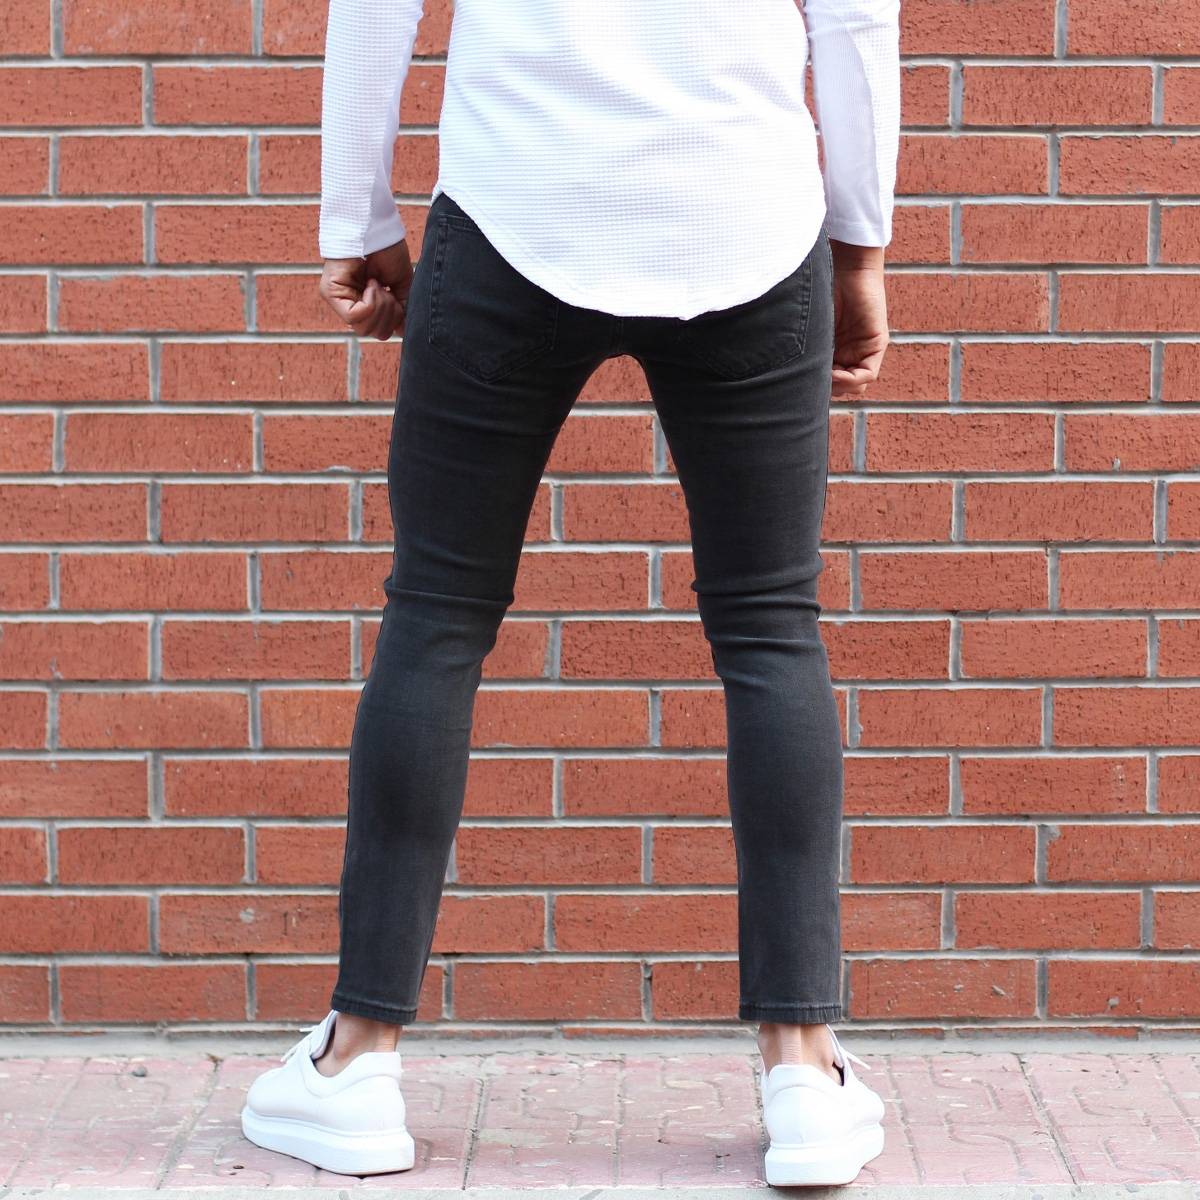 narrow style jeans